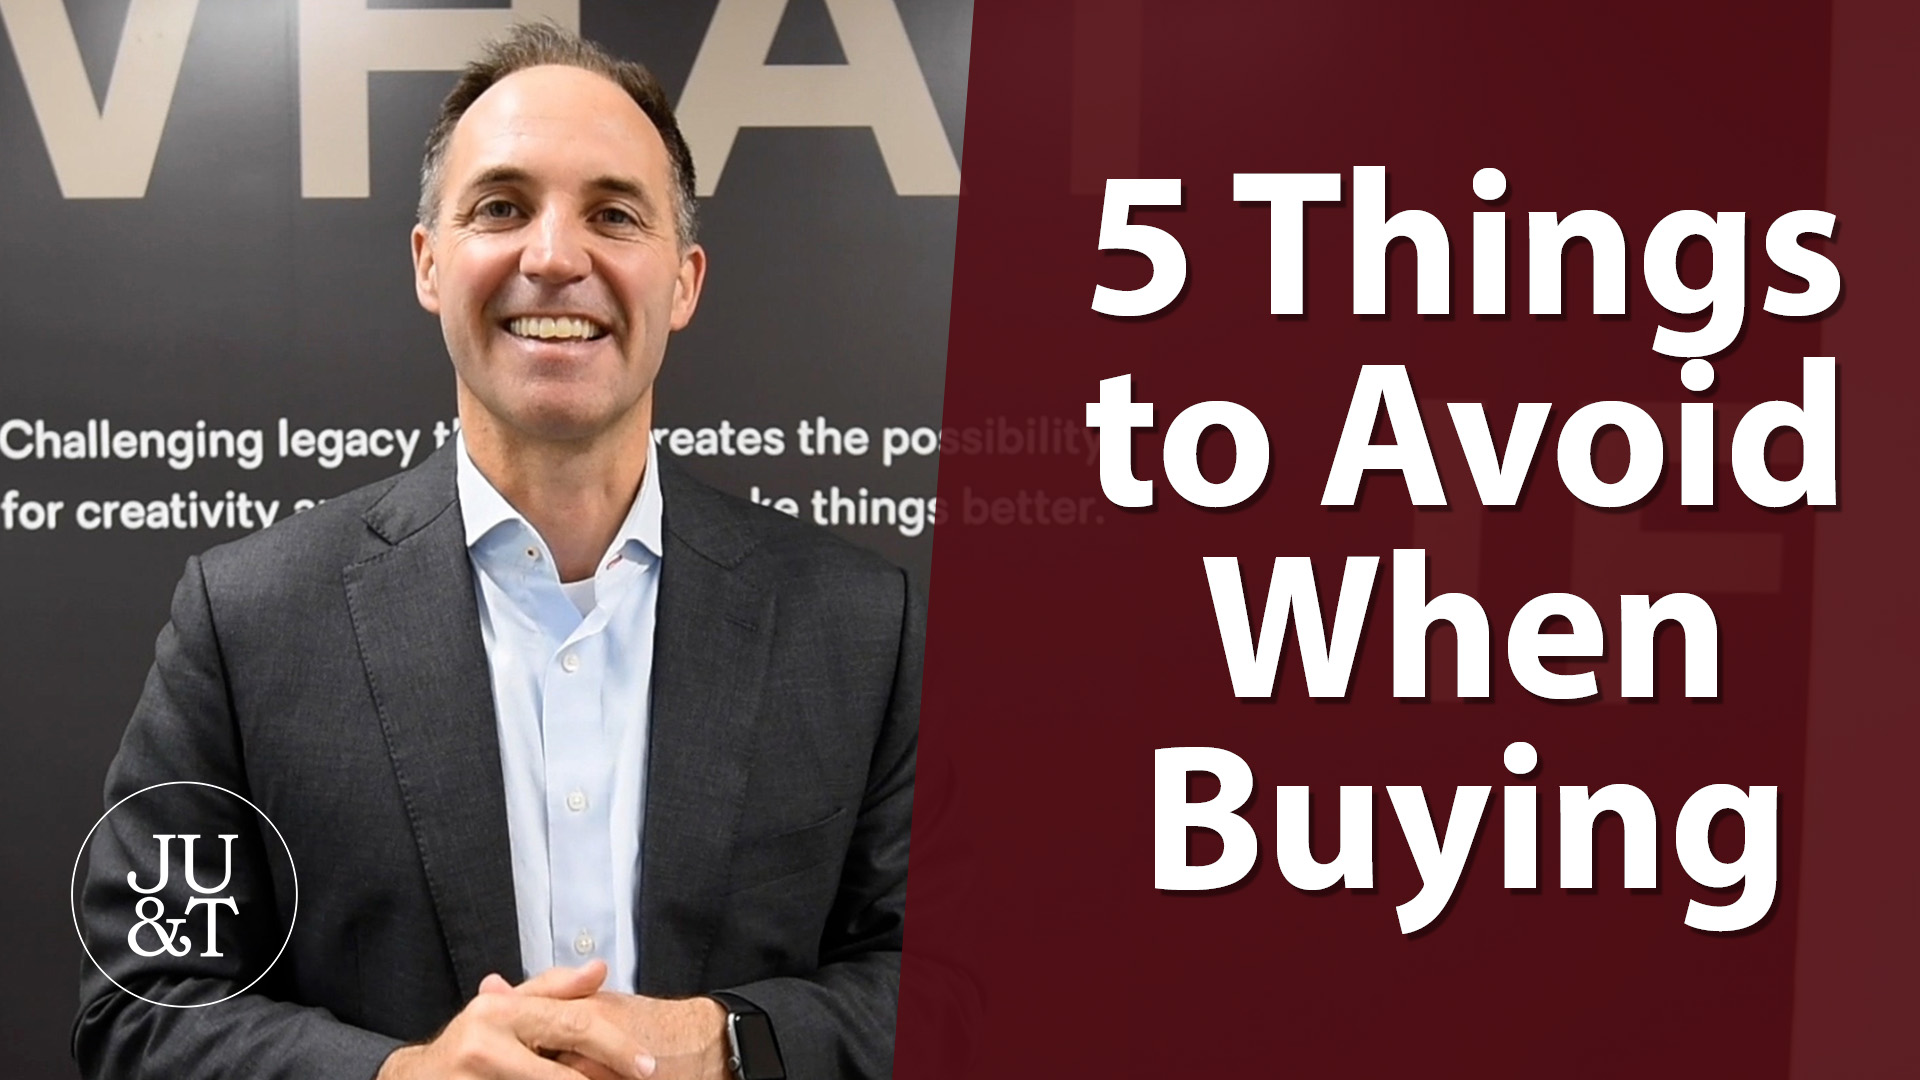 What To Avoid as a Buyer in This Market